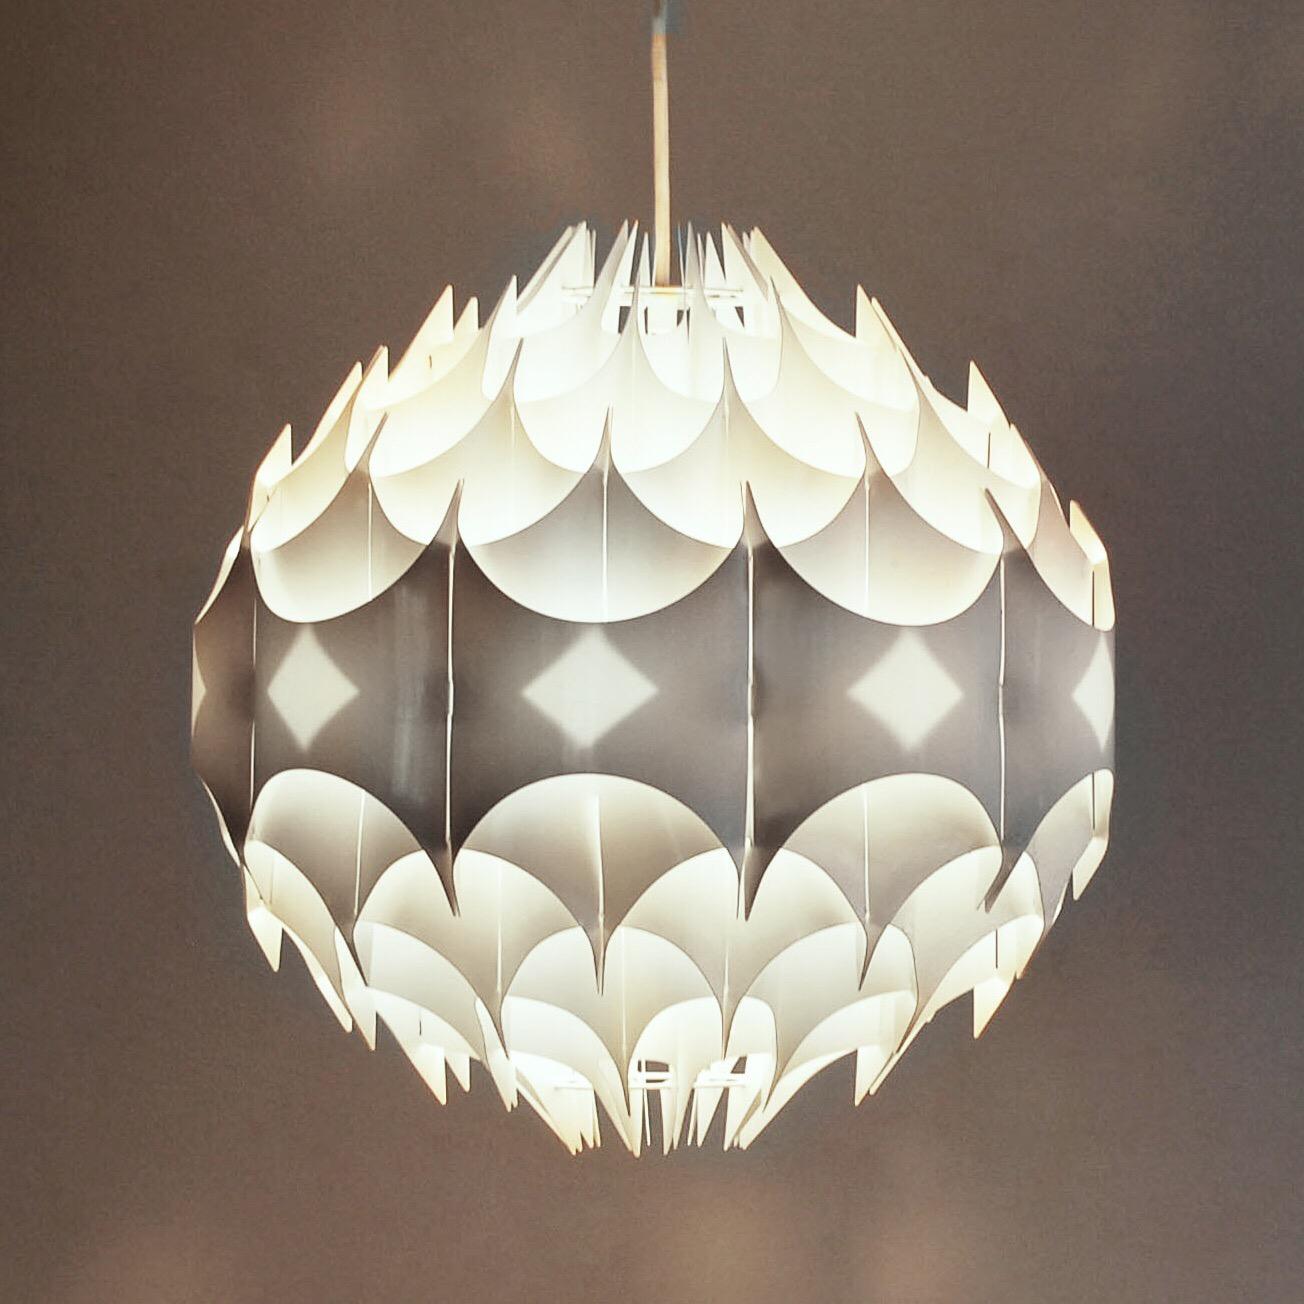 A hanging globe pendant, designed by Havlova Milanda and entitled 'Rhythmic' for Vest of Austria, produced circa 1960s-1970s, composed of folded sheets of flexible, creamy white plastic, creating a hyper-modern, very fresh and contemporary